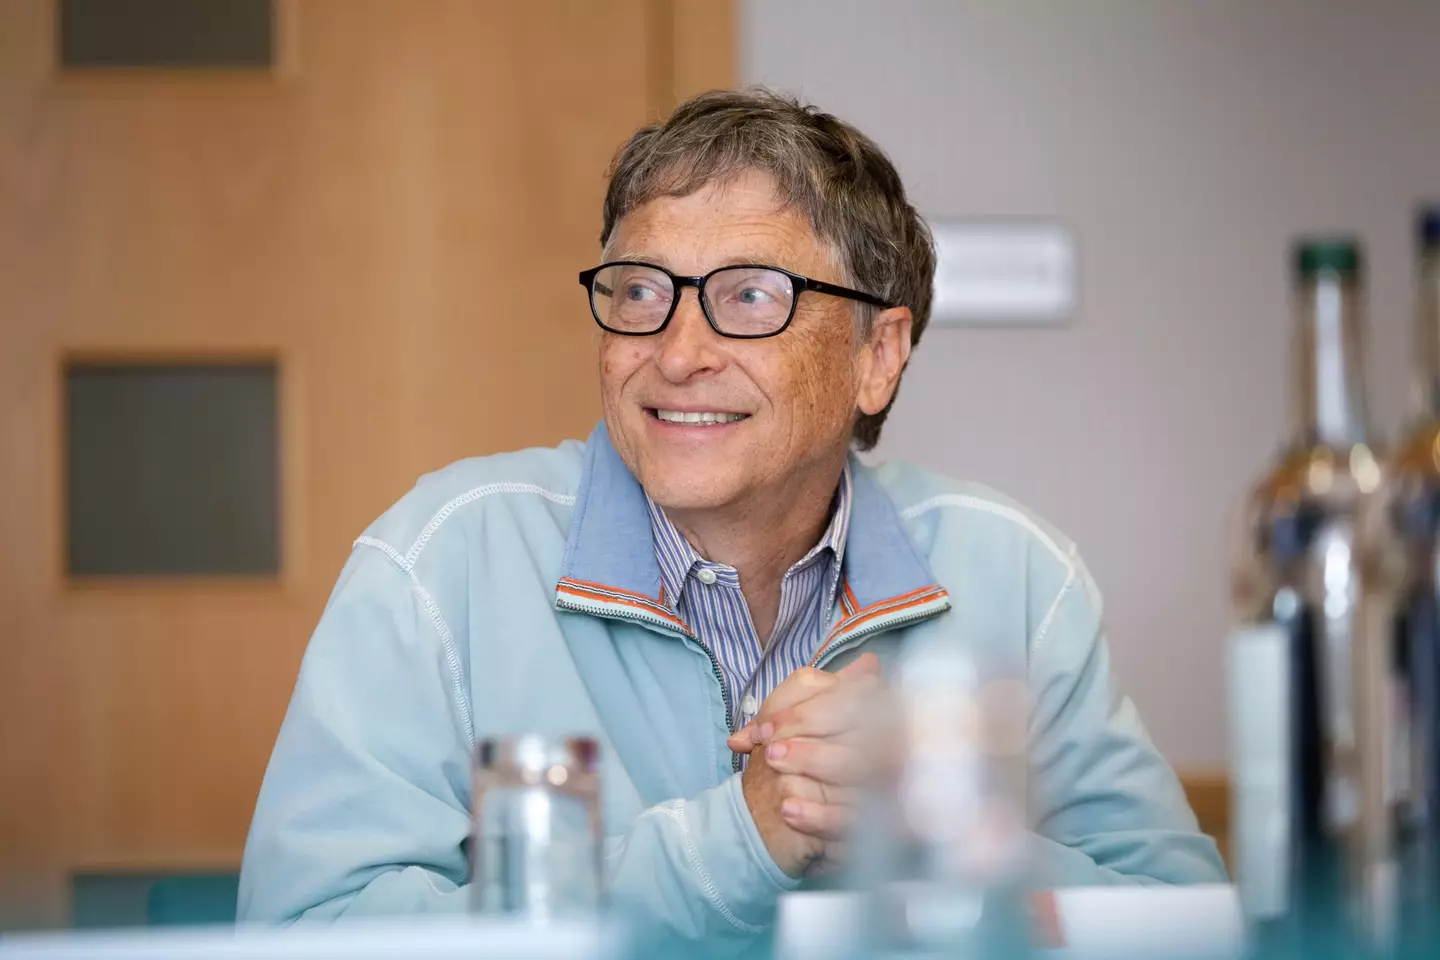 Bill Gates co-founded Microsoft.